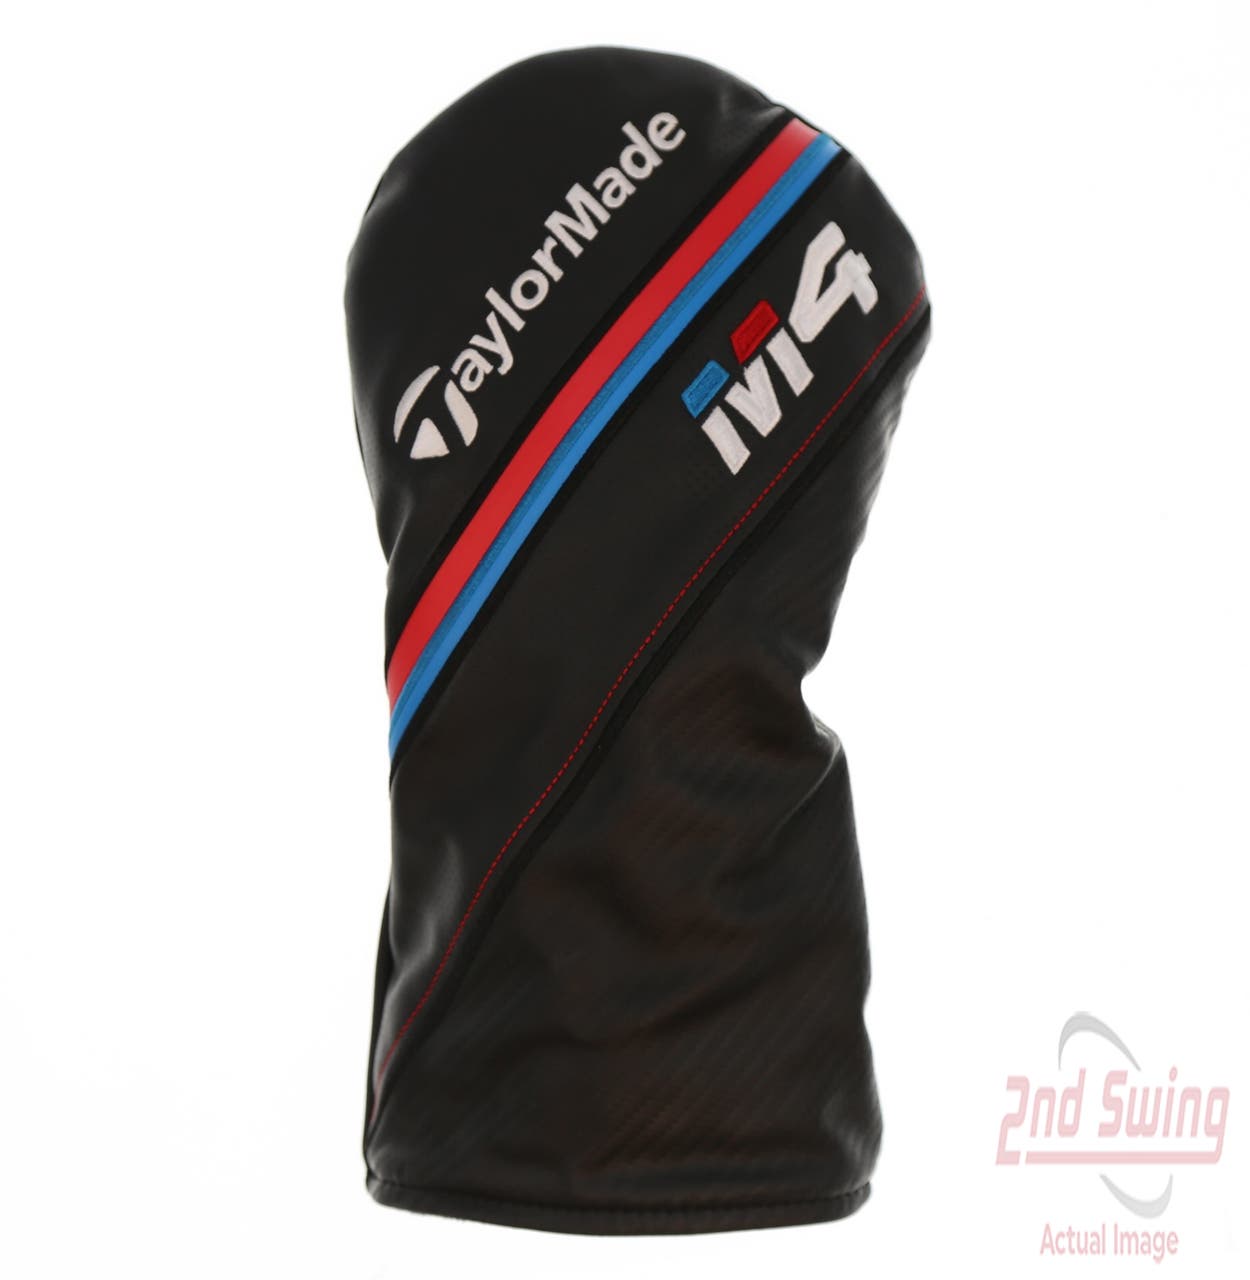 TaylorMade 2018 M4 Driver Headcover Black/Blue/Red